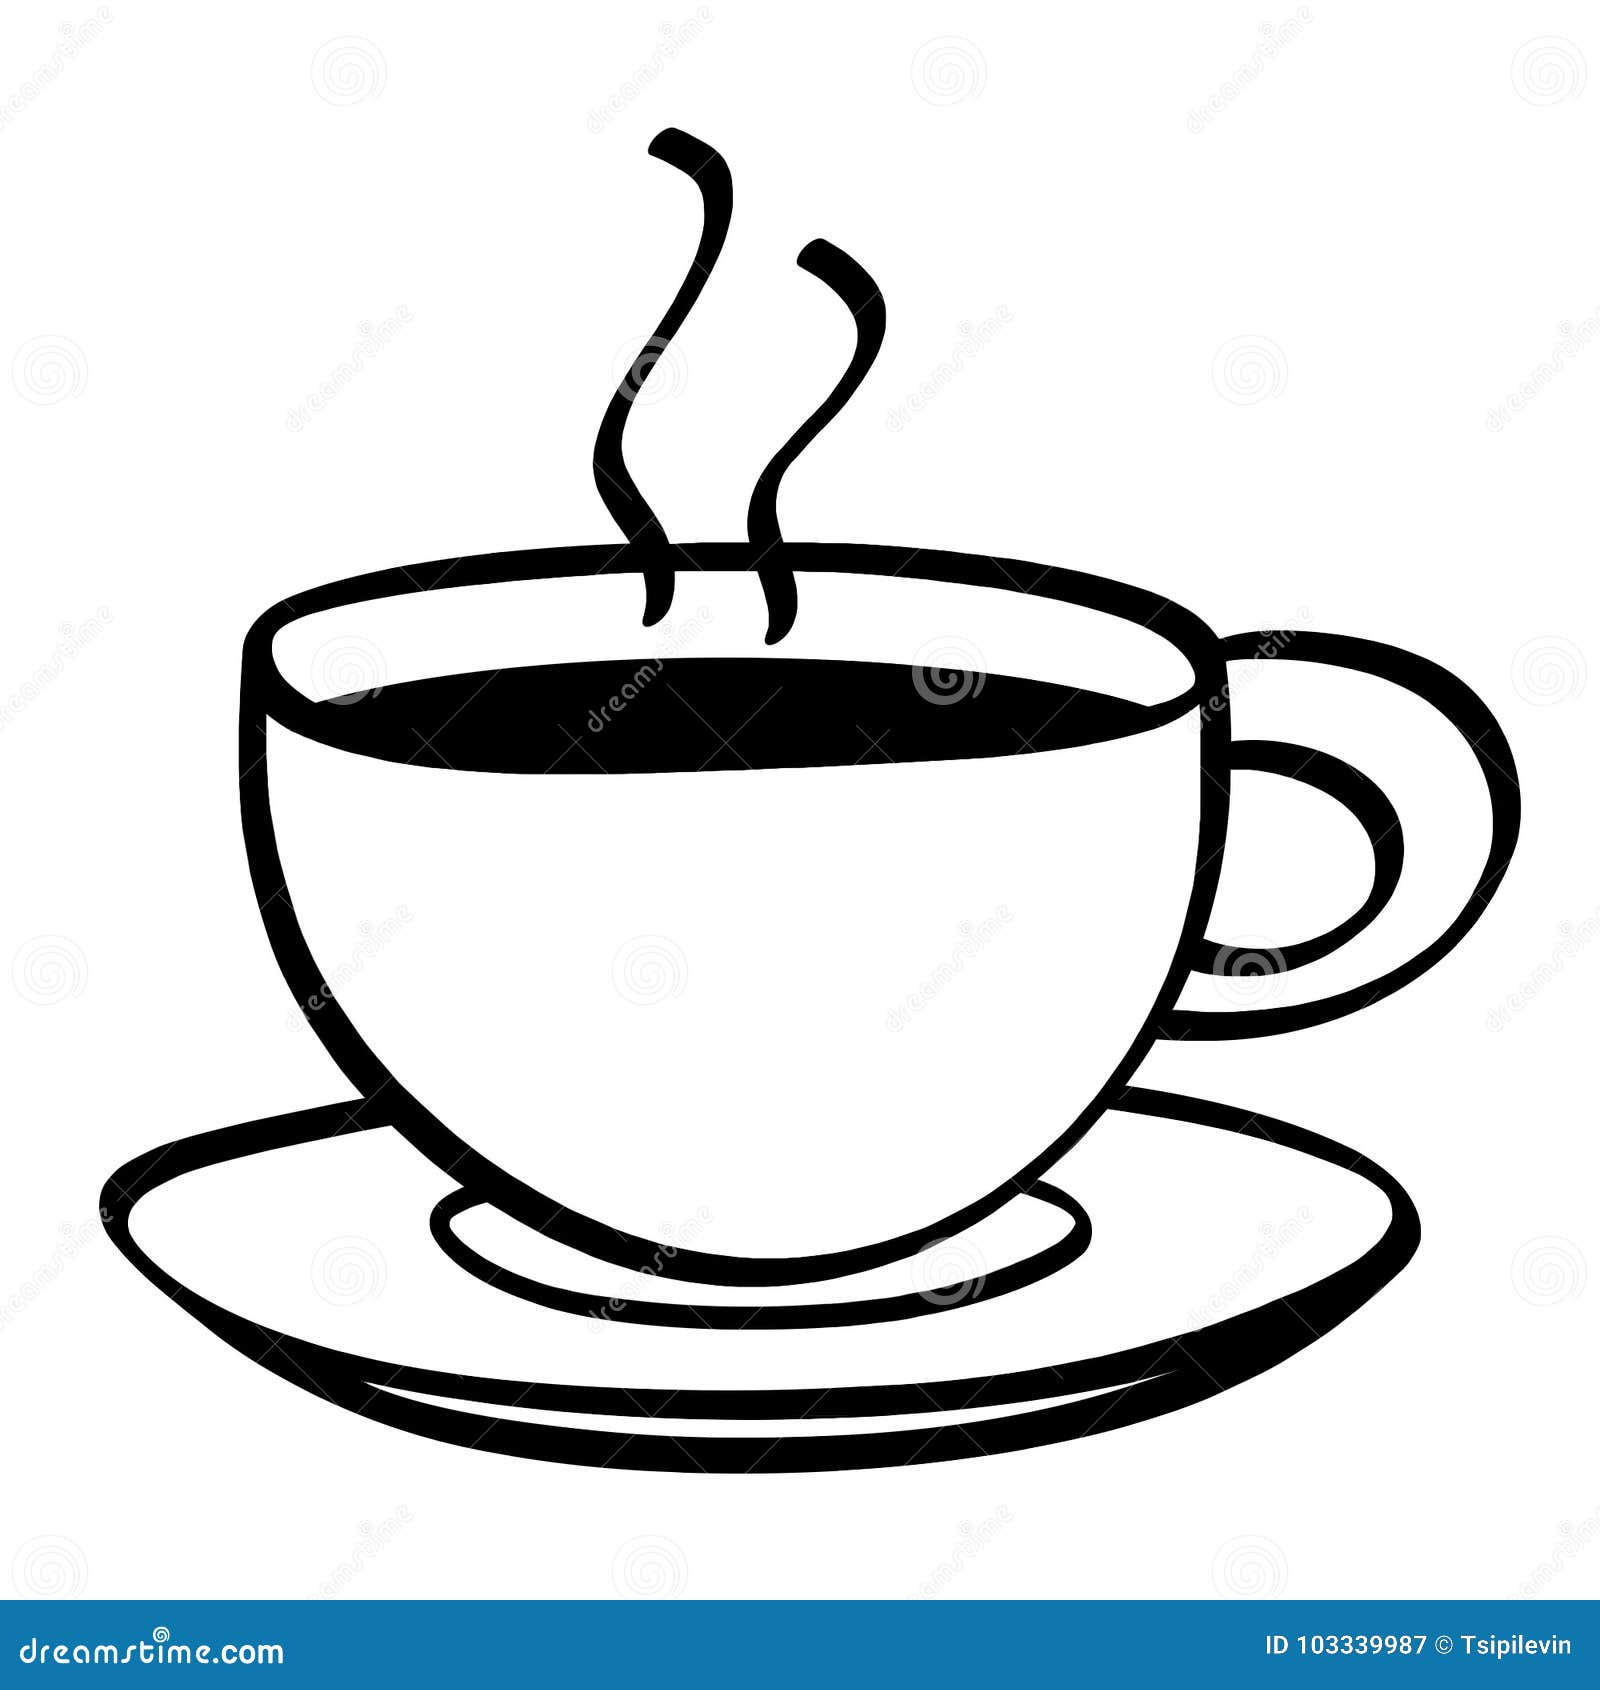 Cup Of Coffee Black And White Illustration Stock